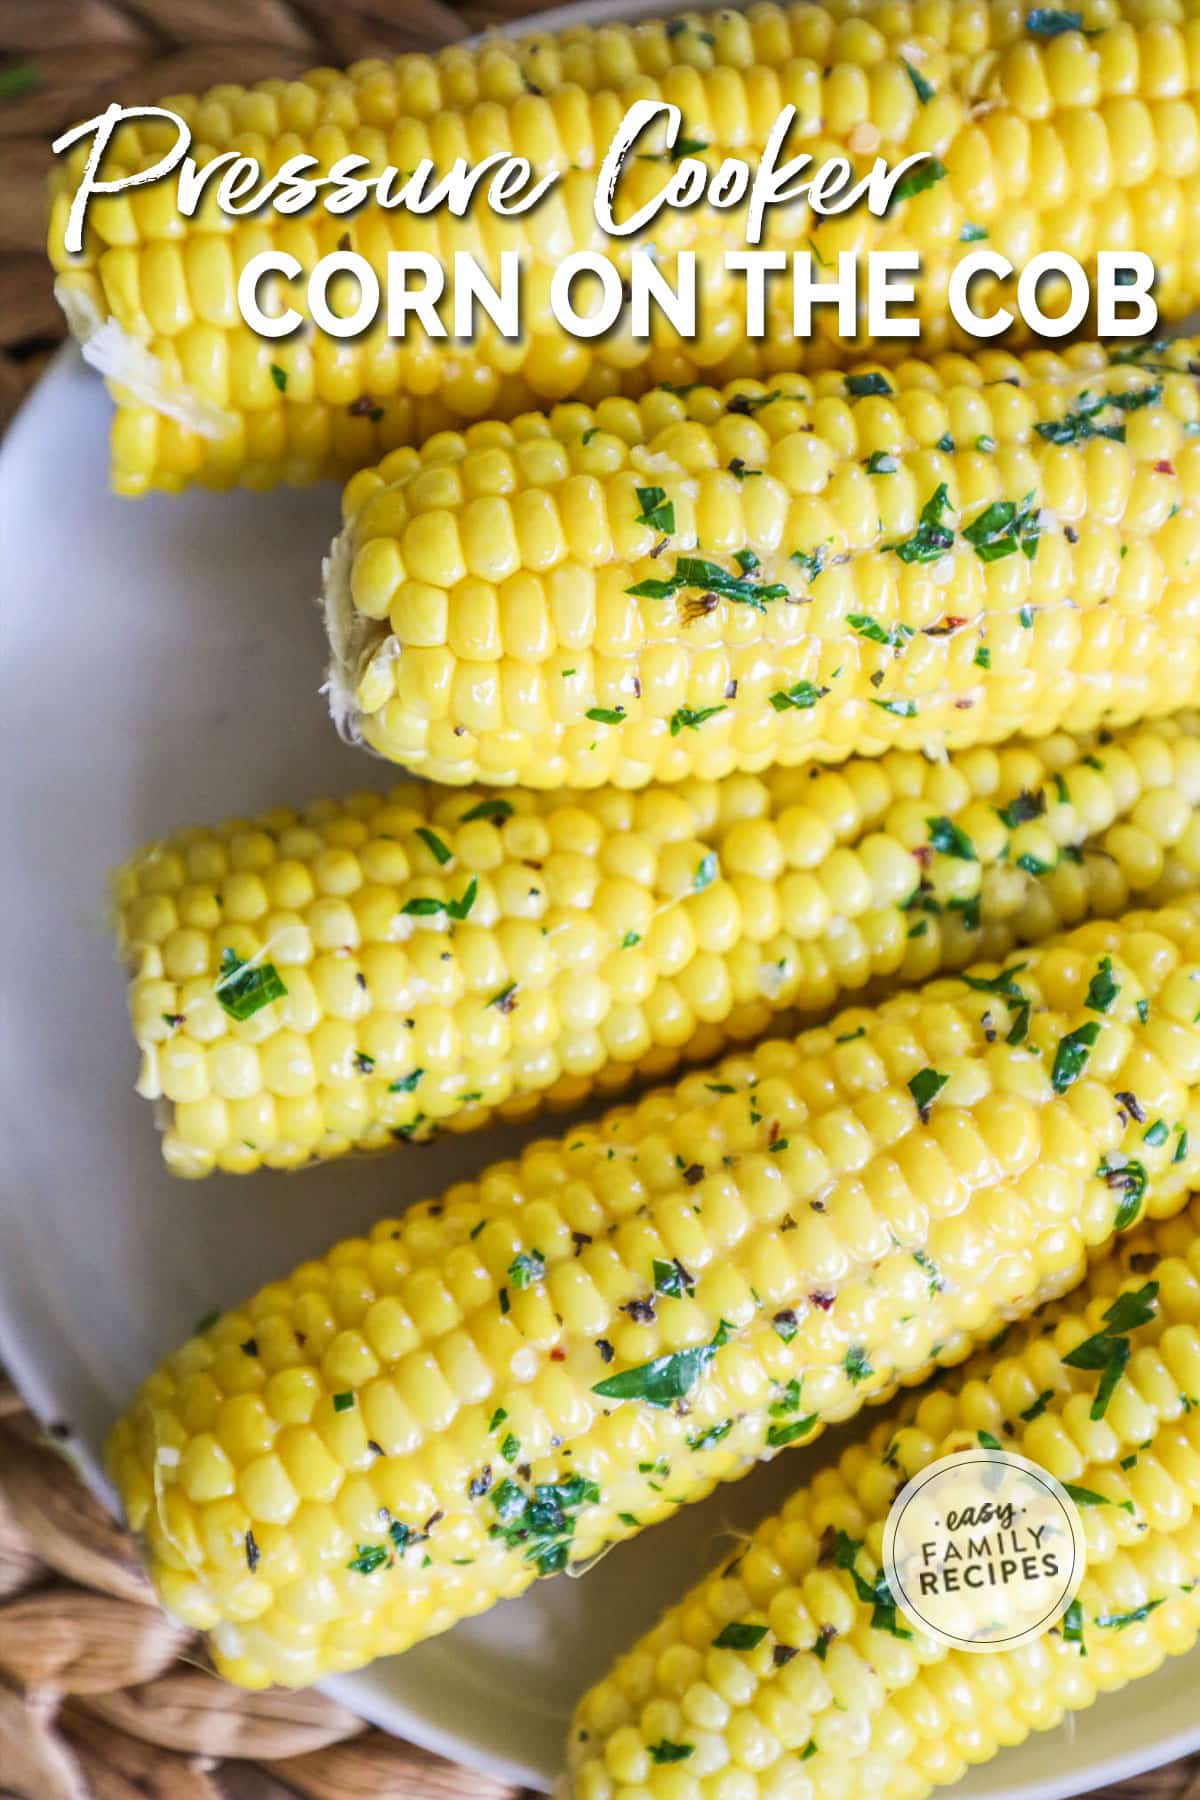 Corn on the cob with garlic butter on a plate.